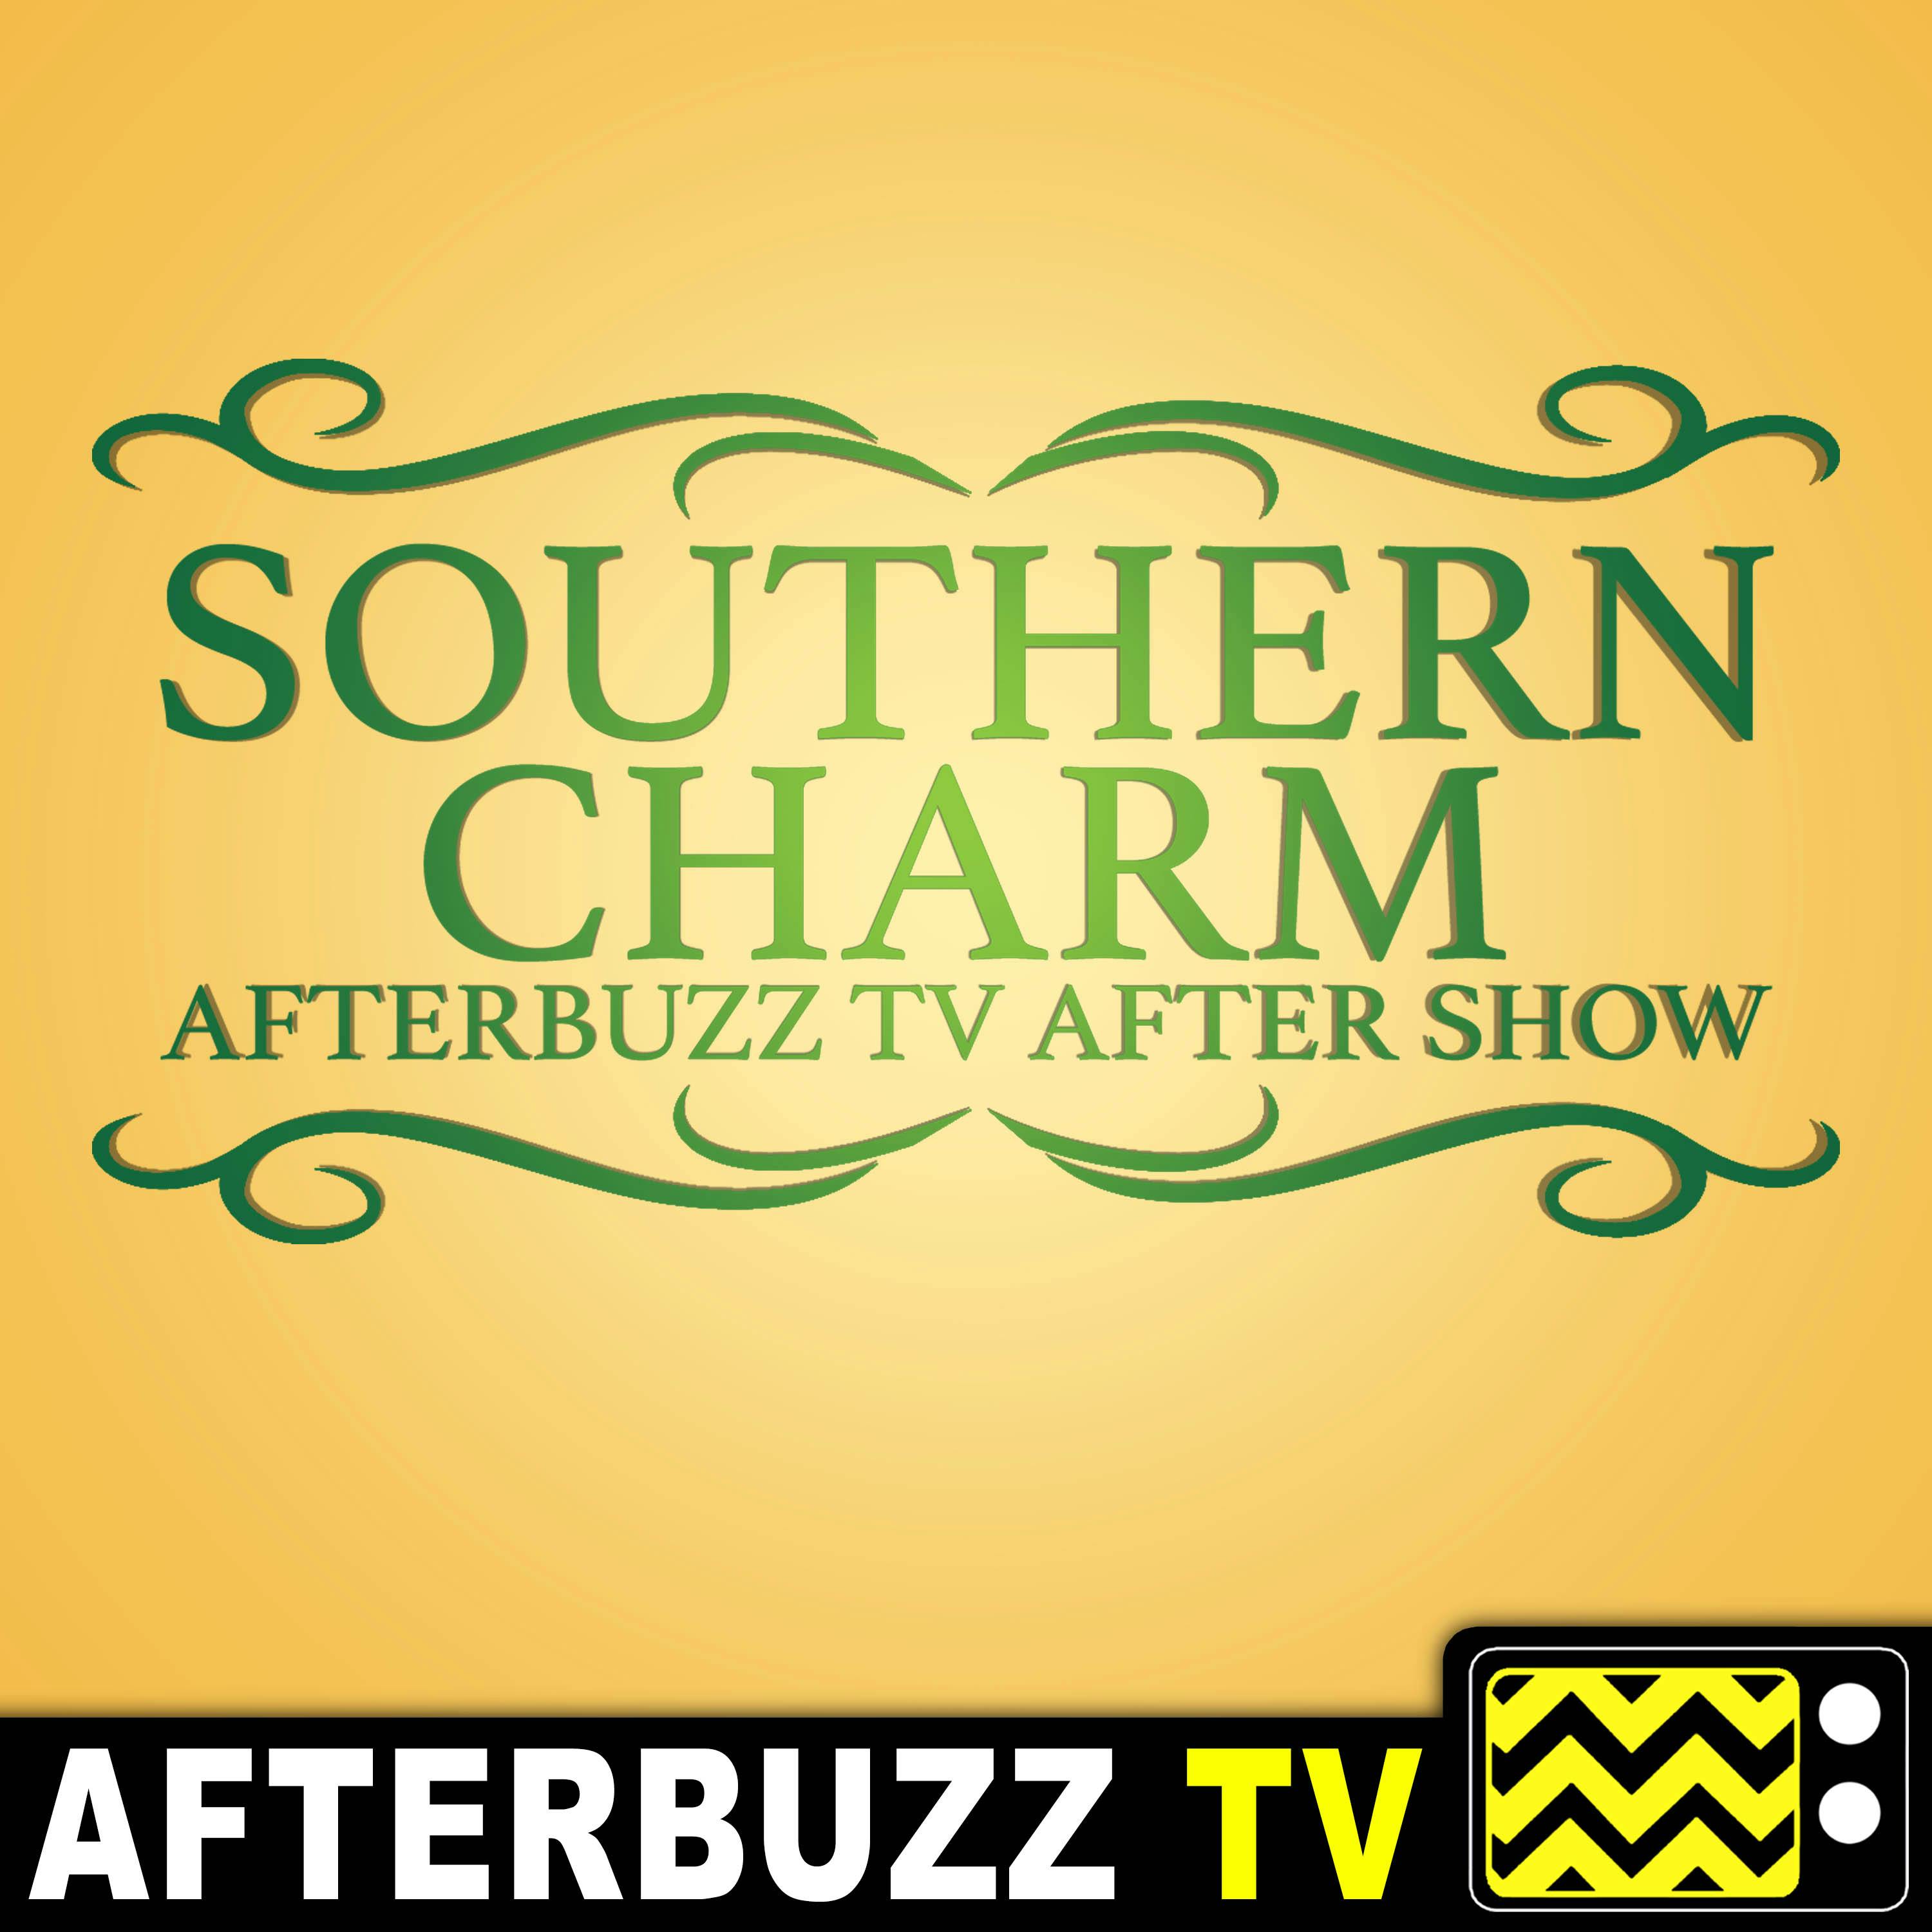 ”New Craig, Who Dis?; Sorry Not Sorry” Season 6 Episodes 7 & 8 ’Southern Charm’ Review